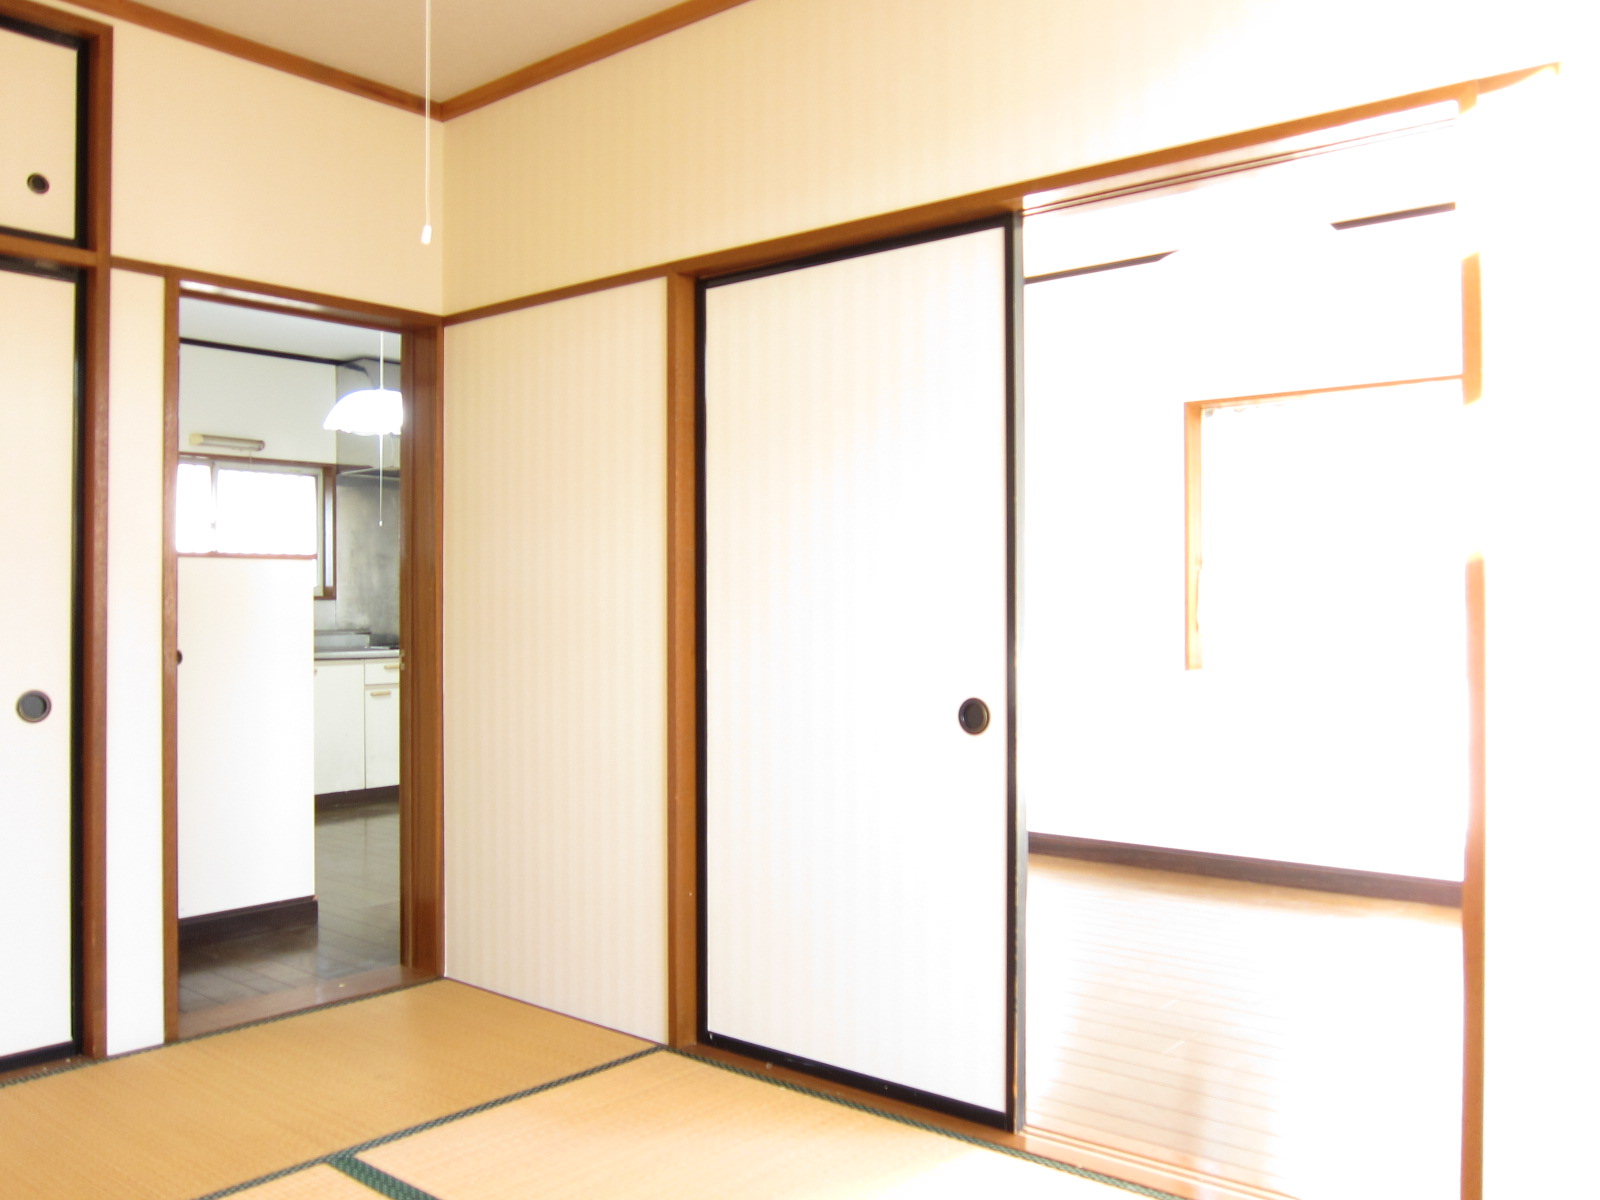 Living and room. Sunny Japanese-style